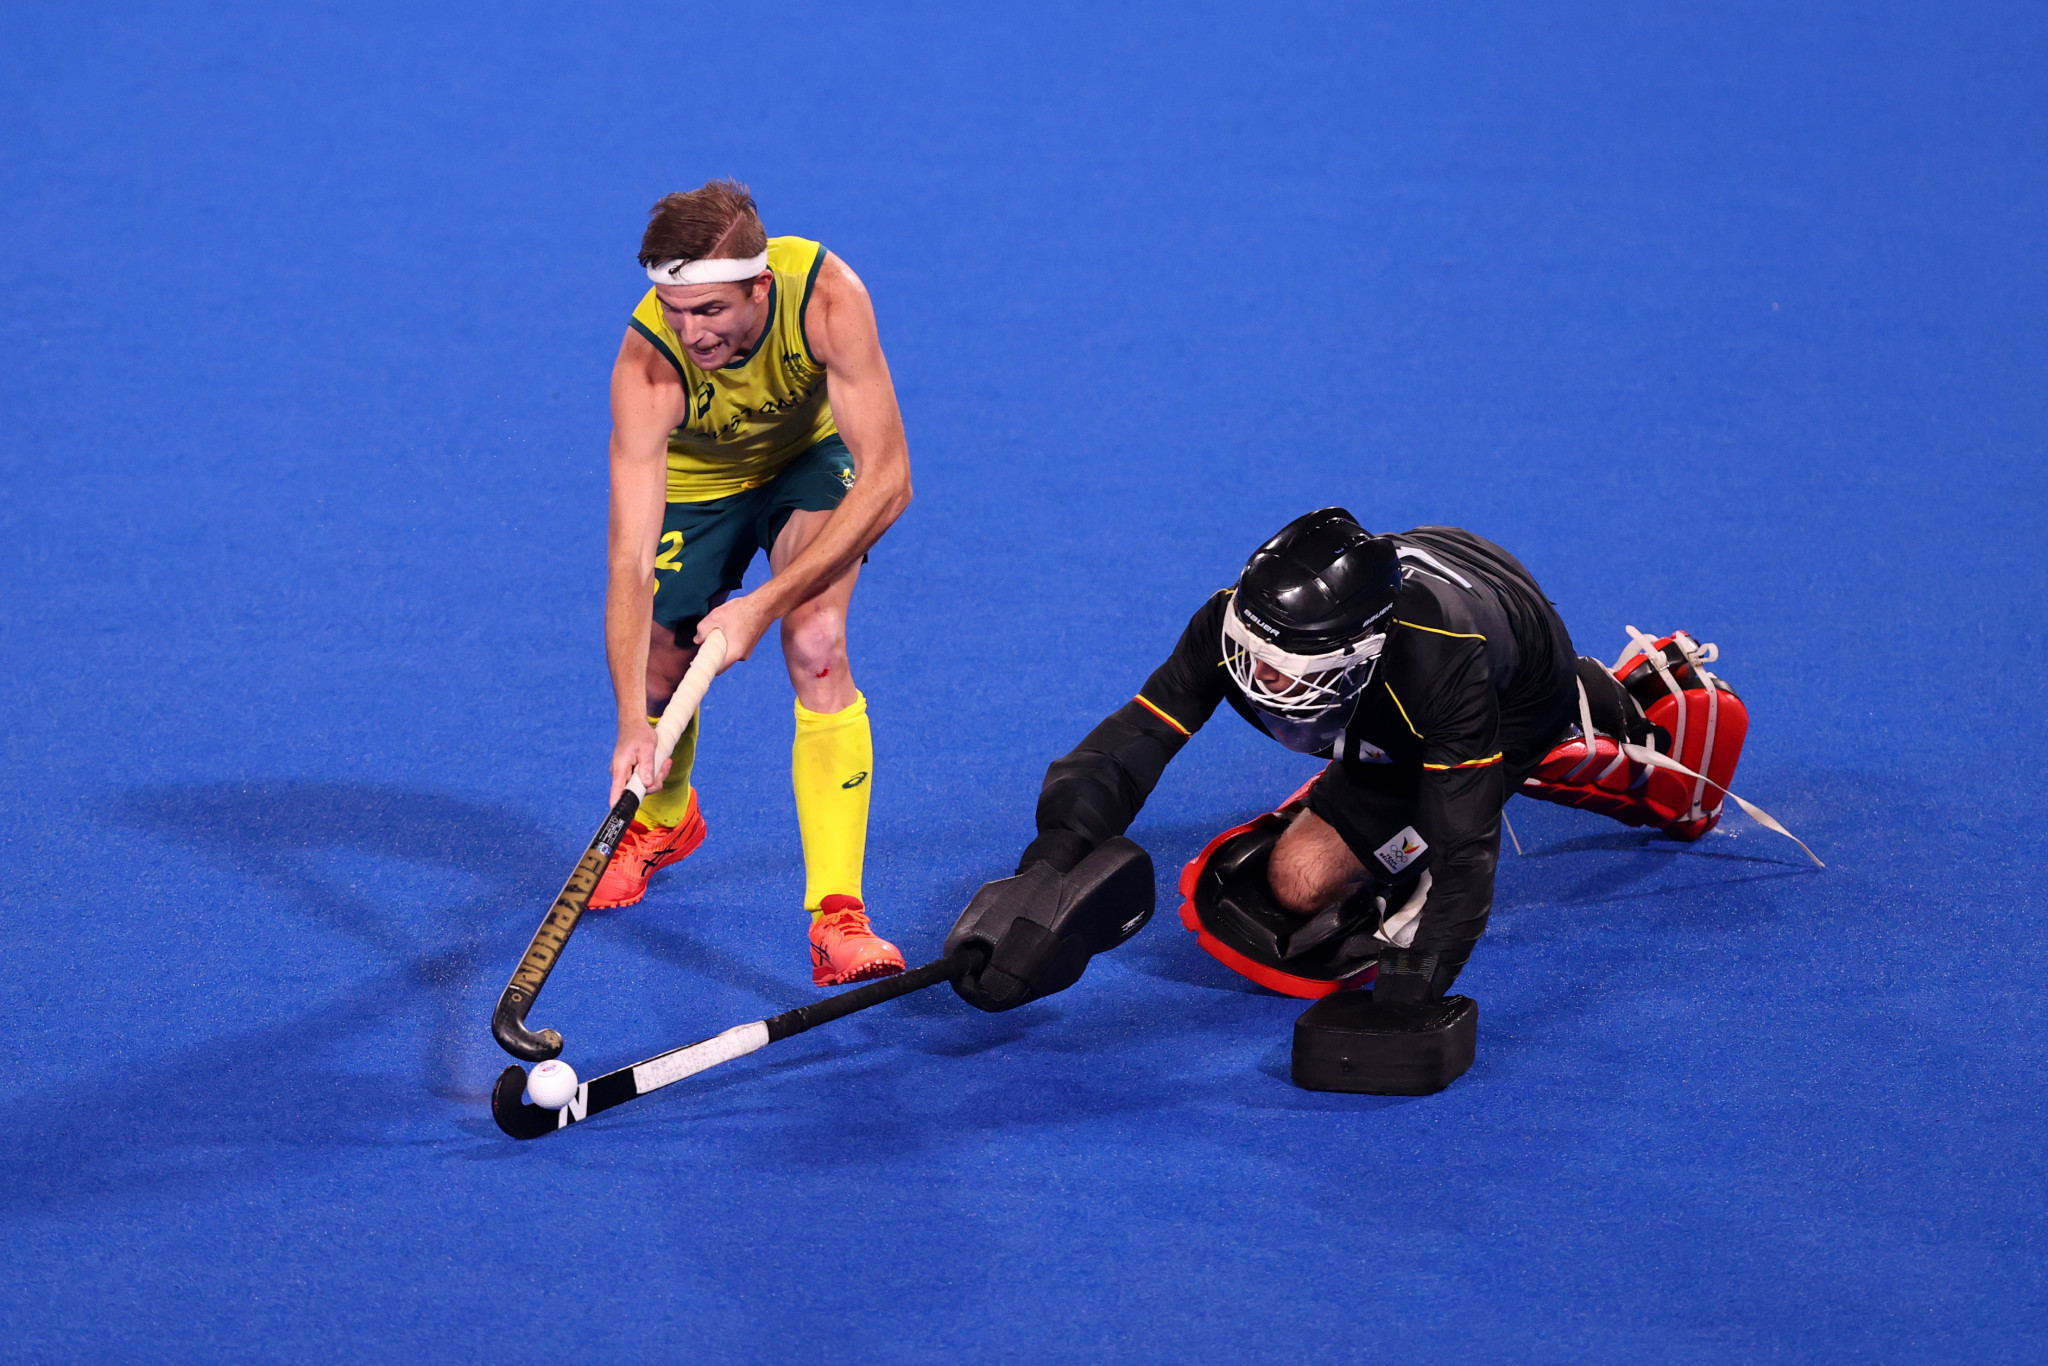 Goalkeeper Vincent Vanasch was the hero for Belgium, twice denying Australia's Jake Whetton in a shootout as Belgium won an Olympic hockey title for the first time ©Getty Images